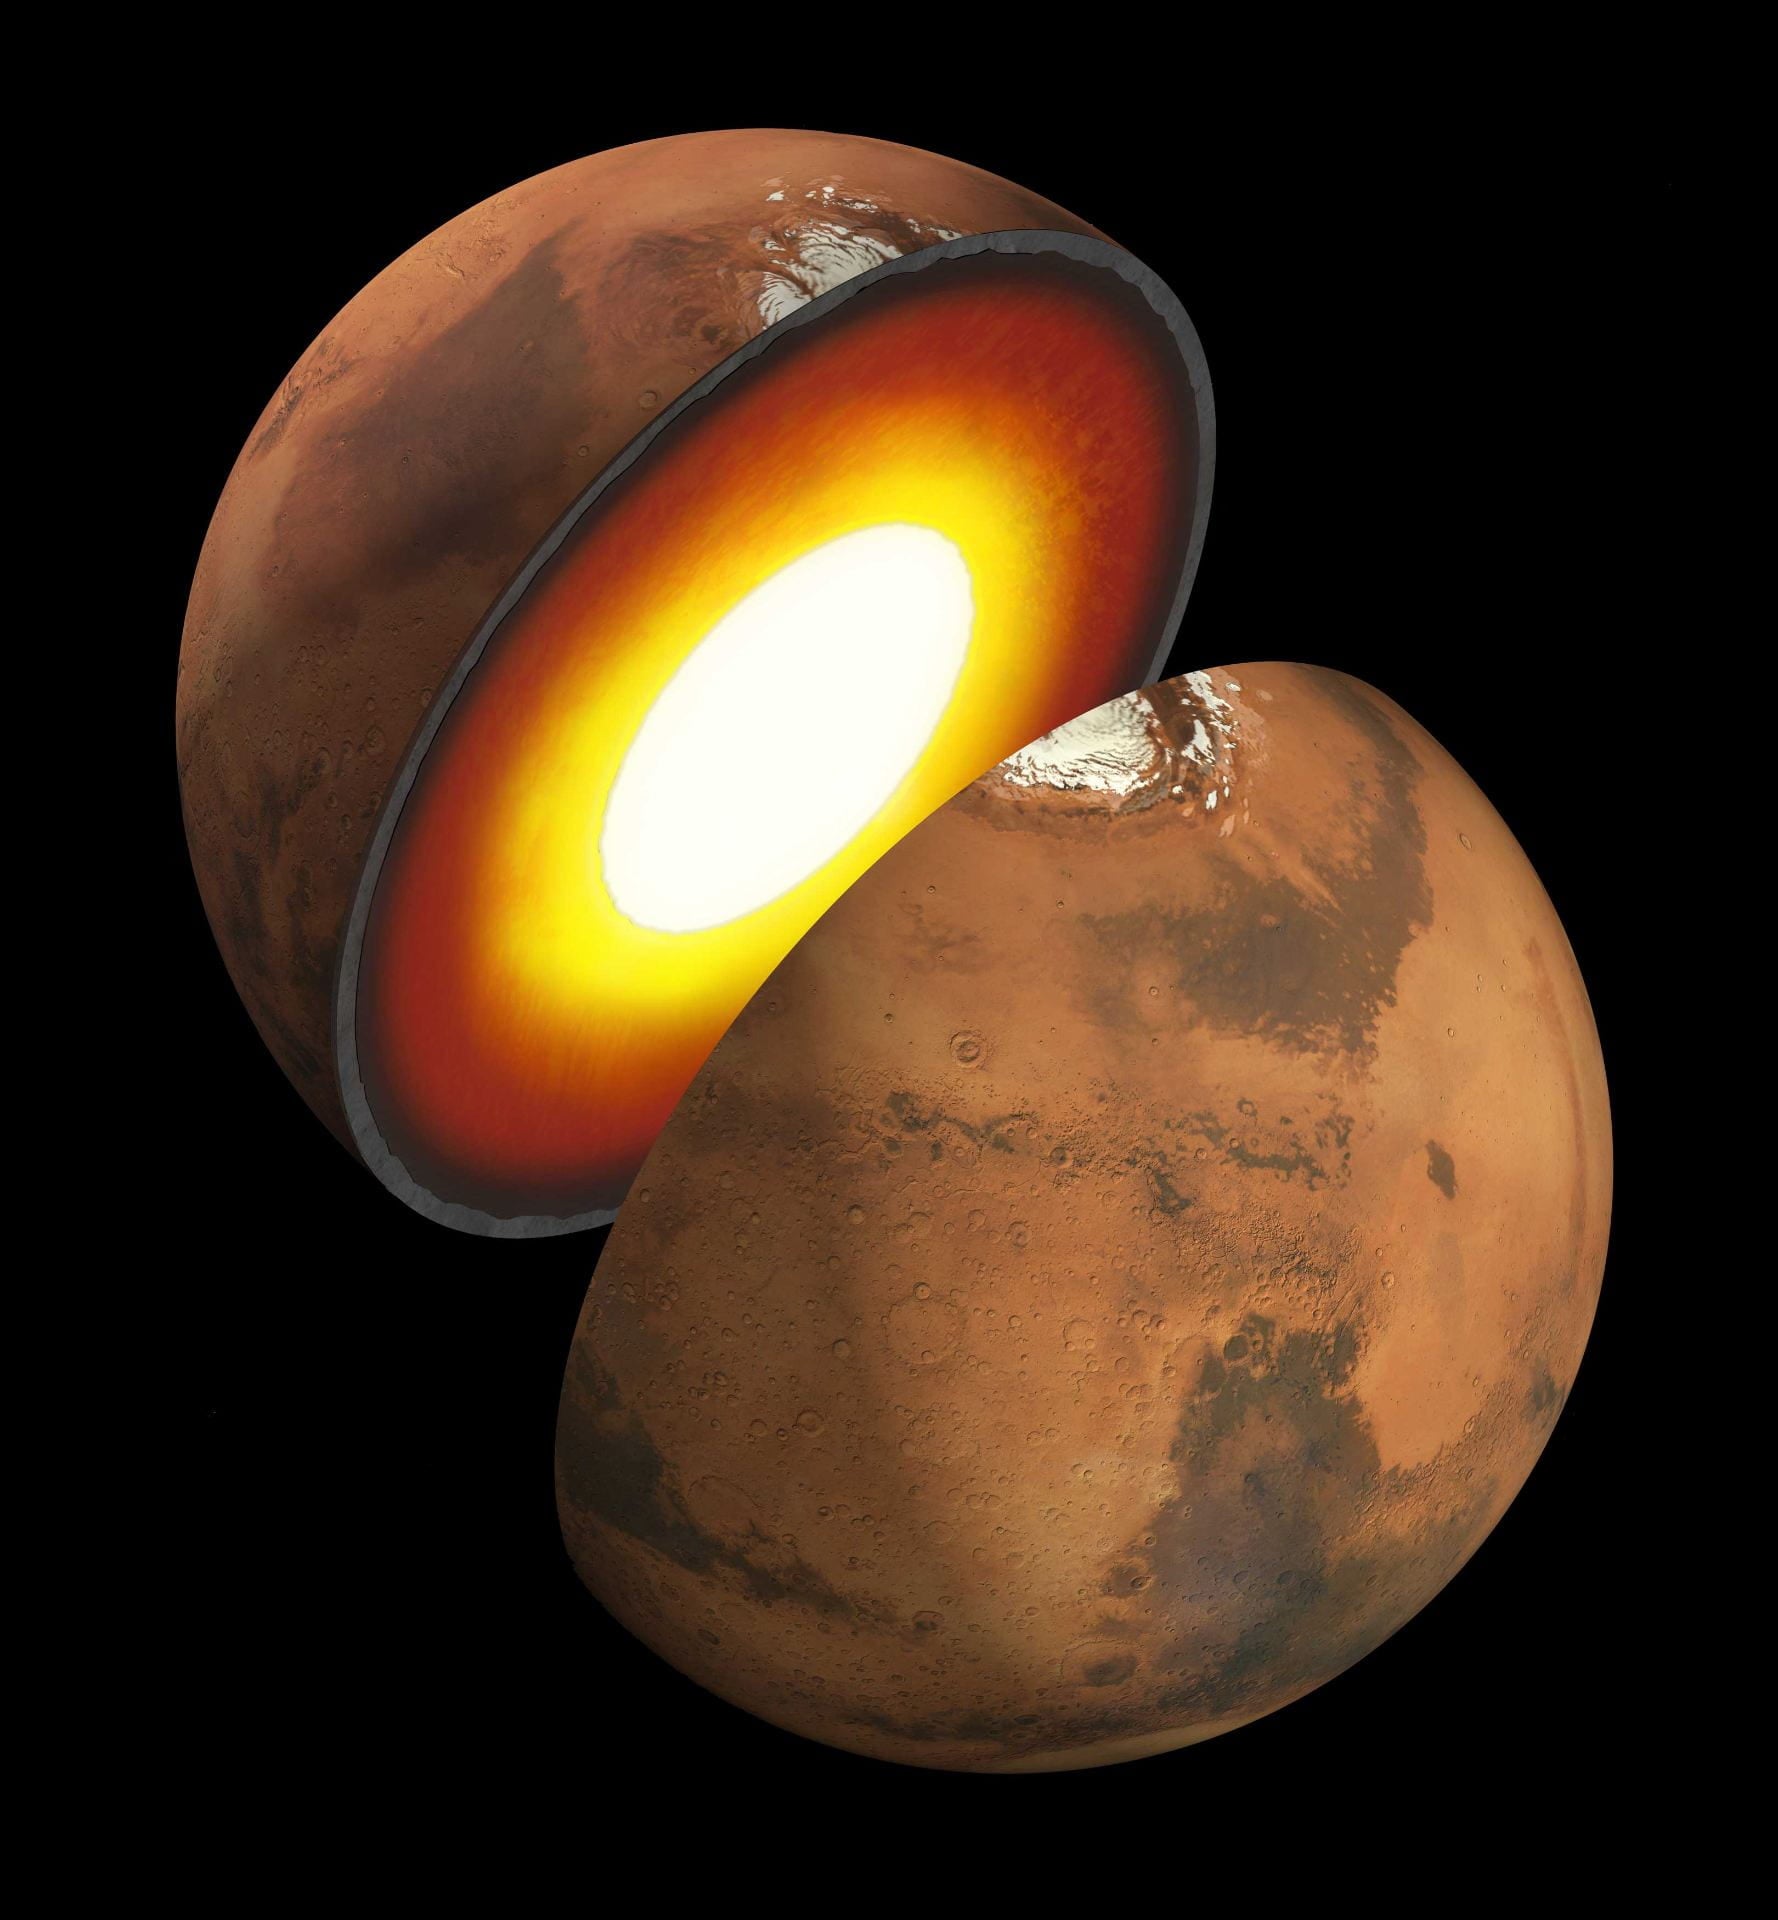 An artist's impression of Mars' inner structure. The topmost layer is the crust, and beneath it is the mantle, which rests on a solid inner core. (Image courtesy of NASA/JPL-Caltech)